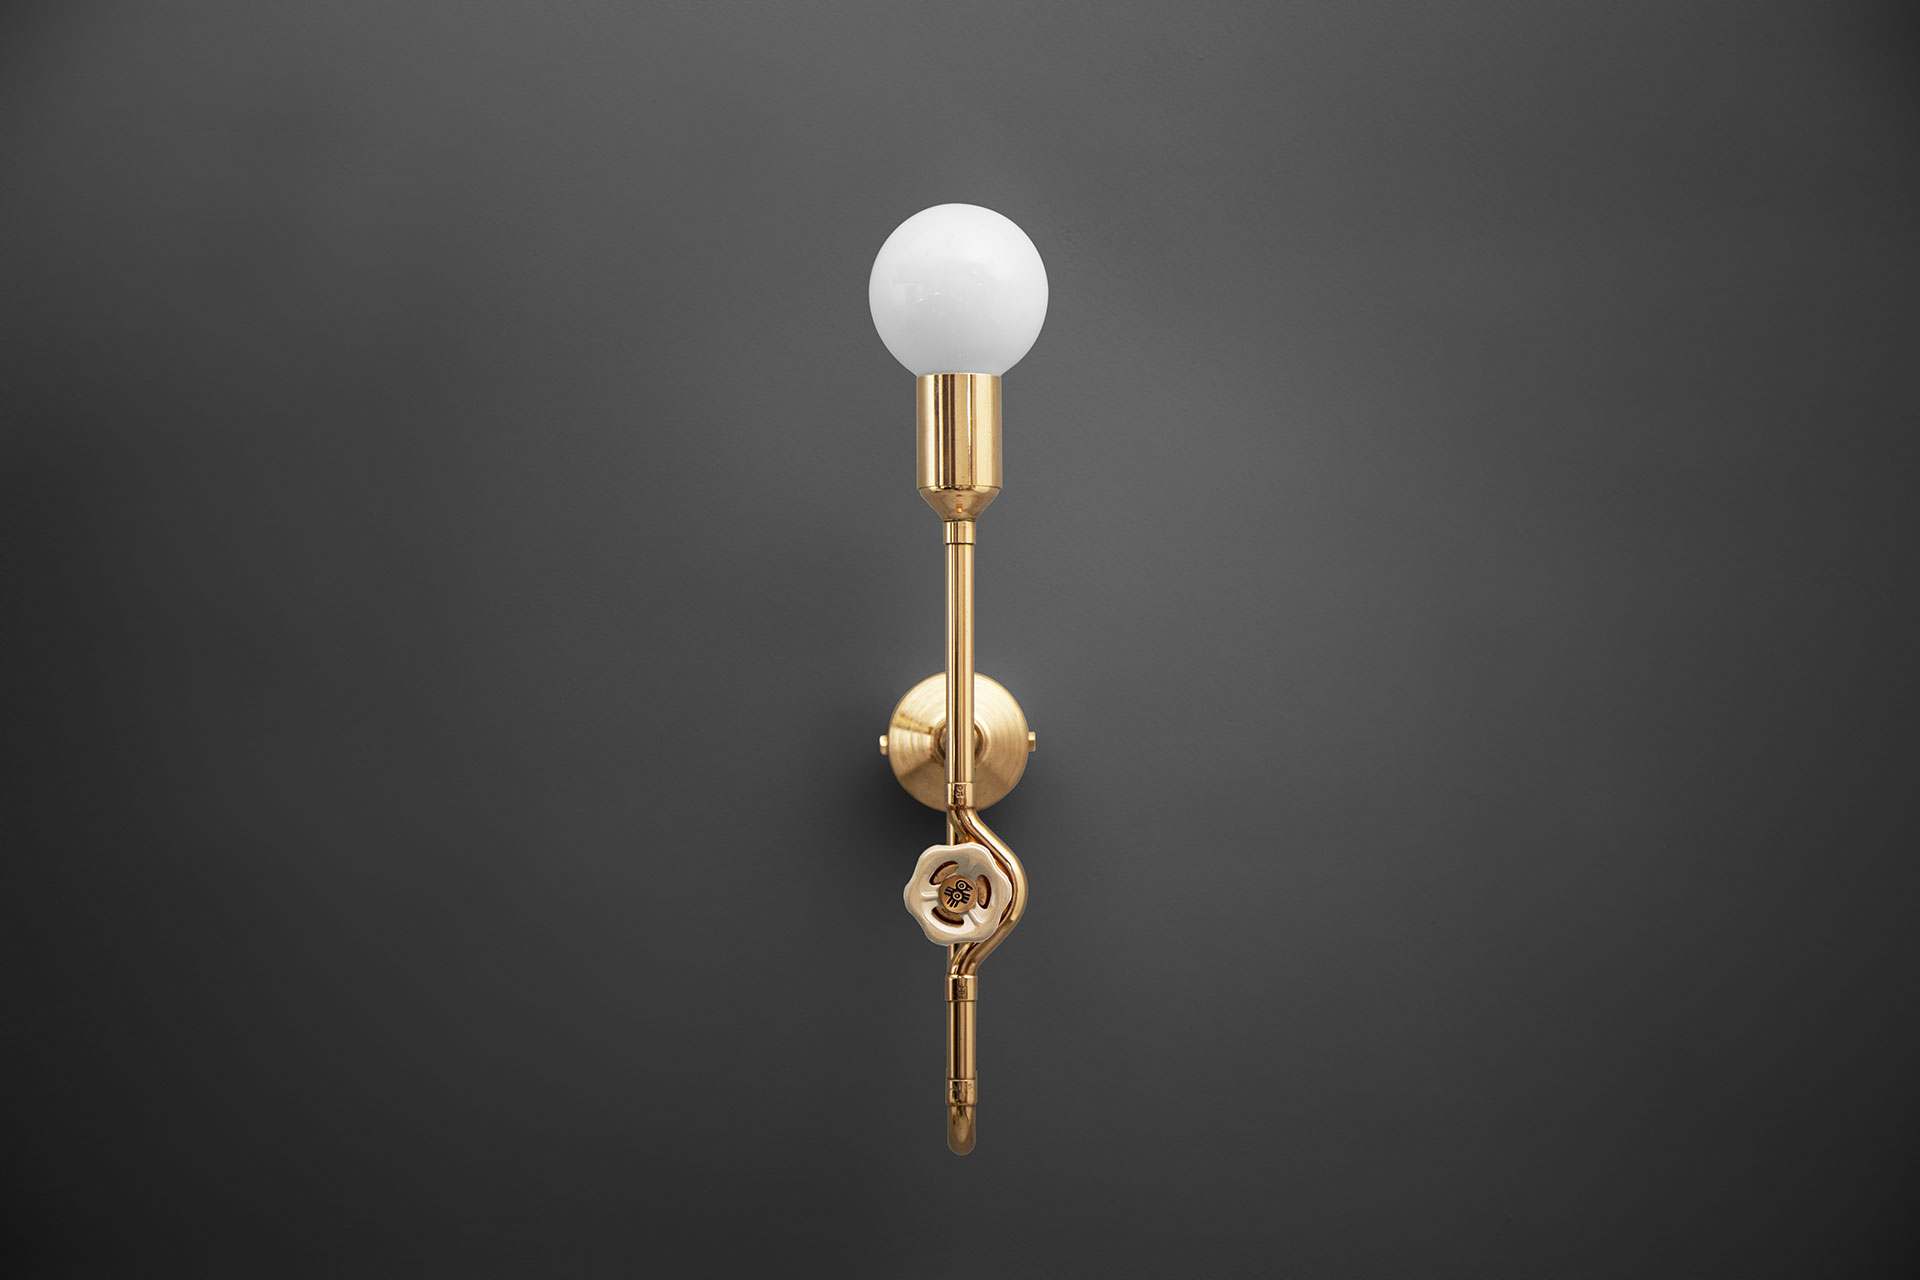 Brass dimmable sconce with vintage ivory knob